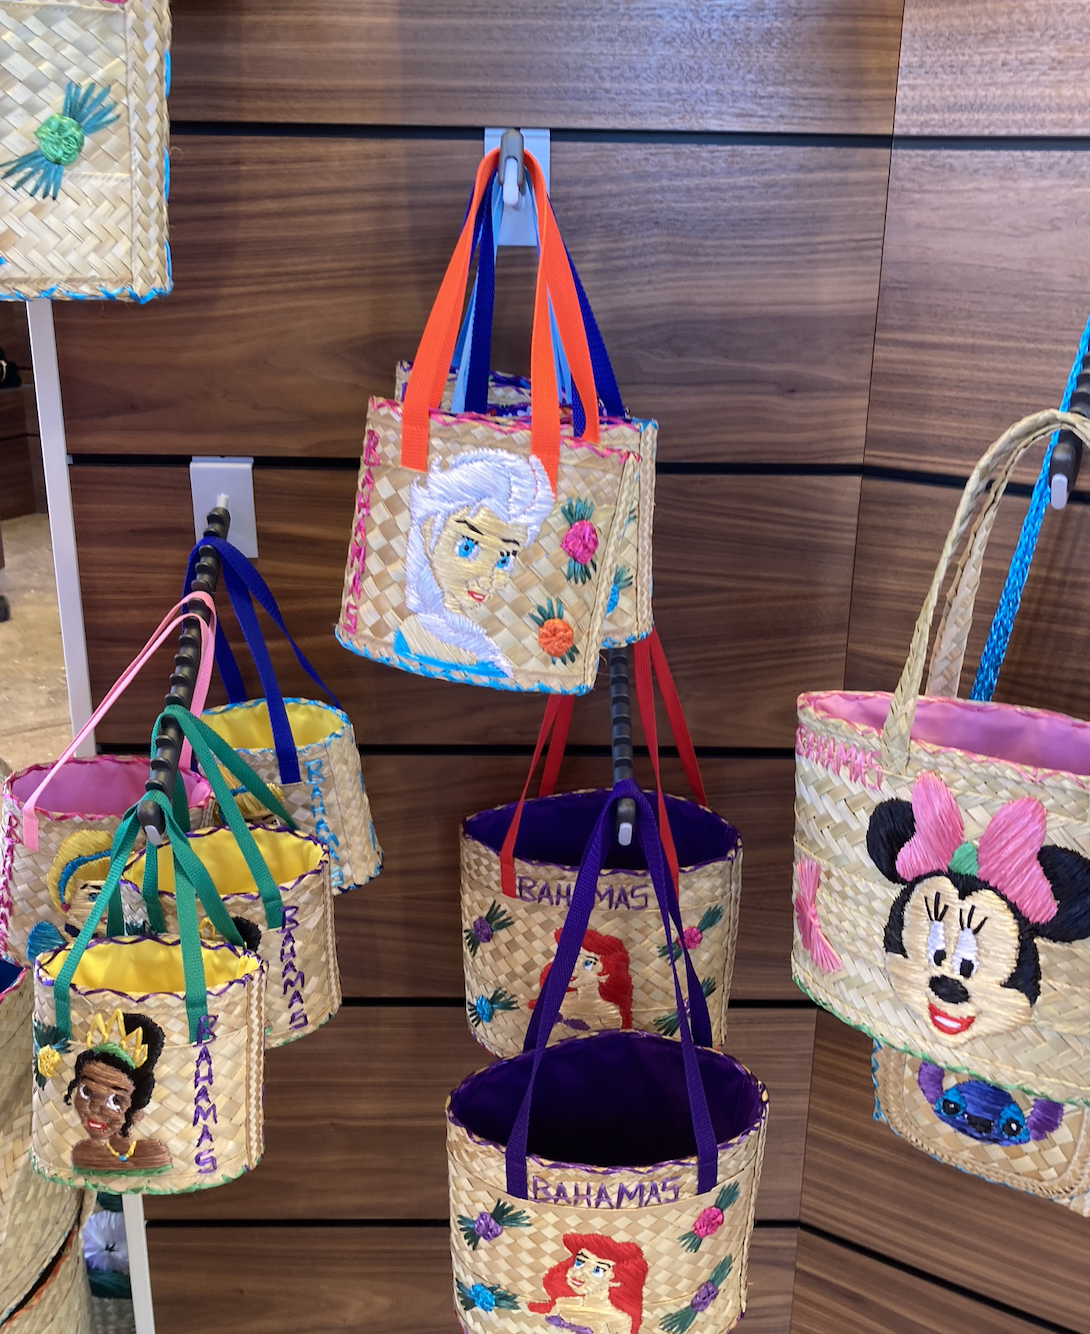 Straw handbags with Disney characters Tiana, Elsa, Ariel, and Minnie Mouse are displayed on wall hooks. Handles are colorful. Bags say &quot;Bahamas.&quot;